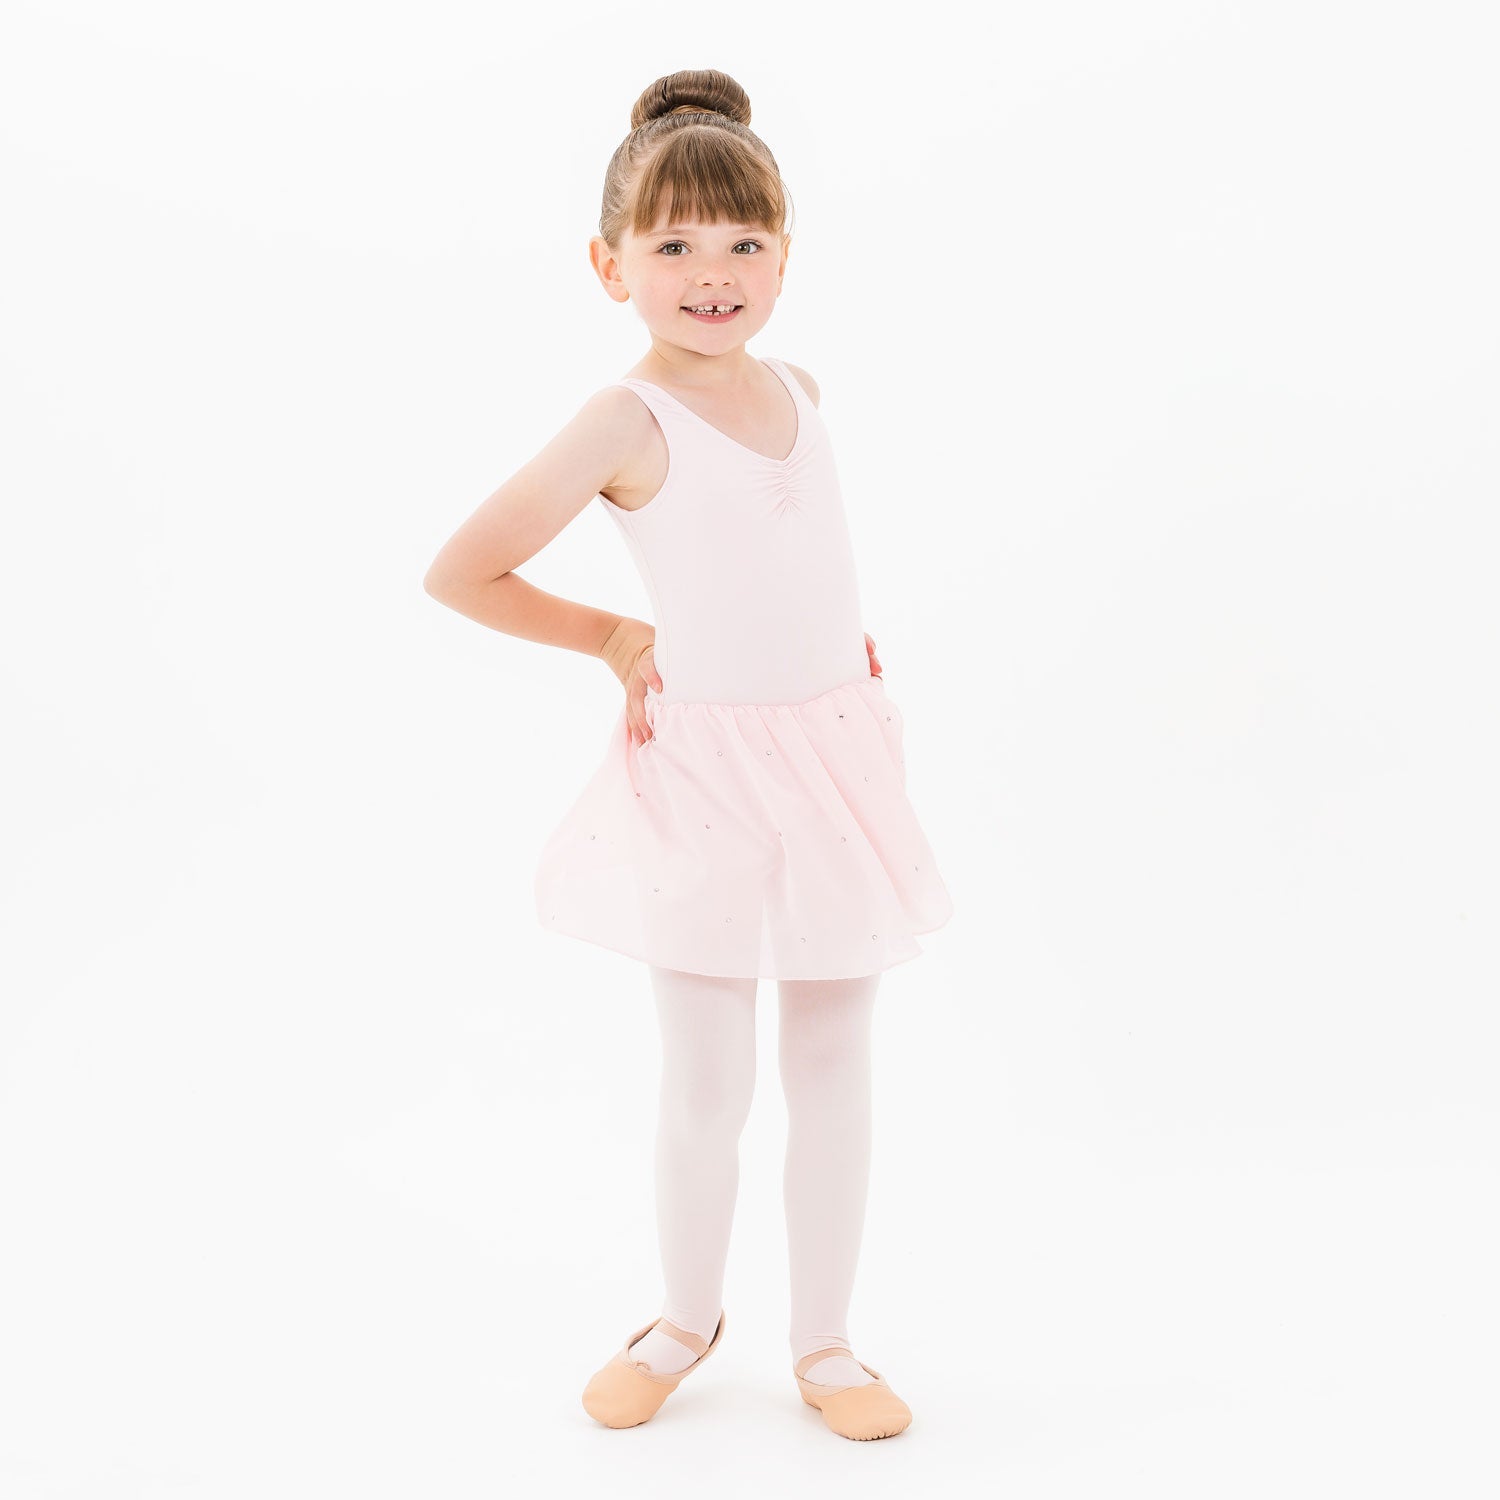 Quick Fix: How to stop a run in your ballet tights – Flo Dancewear